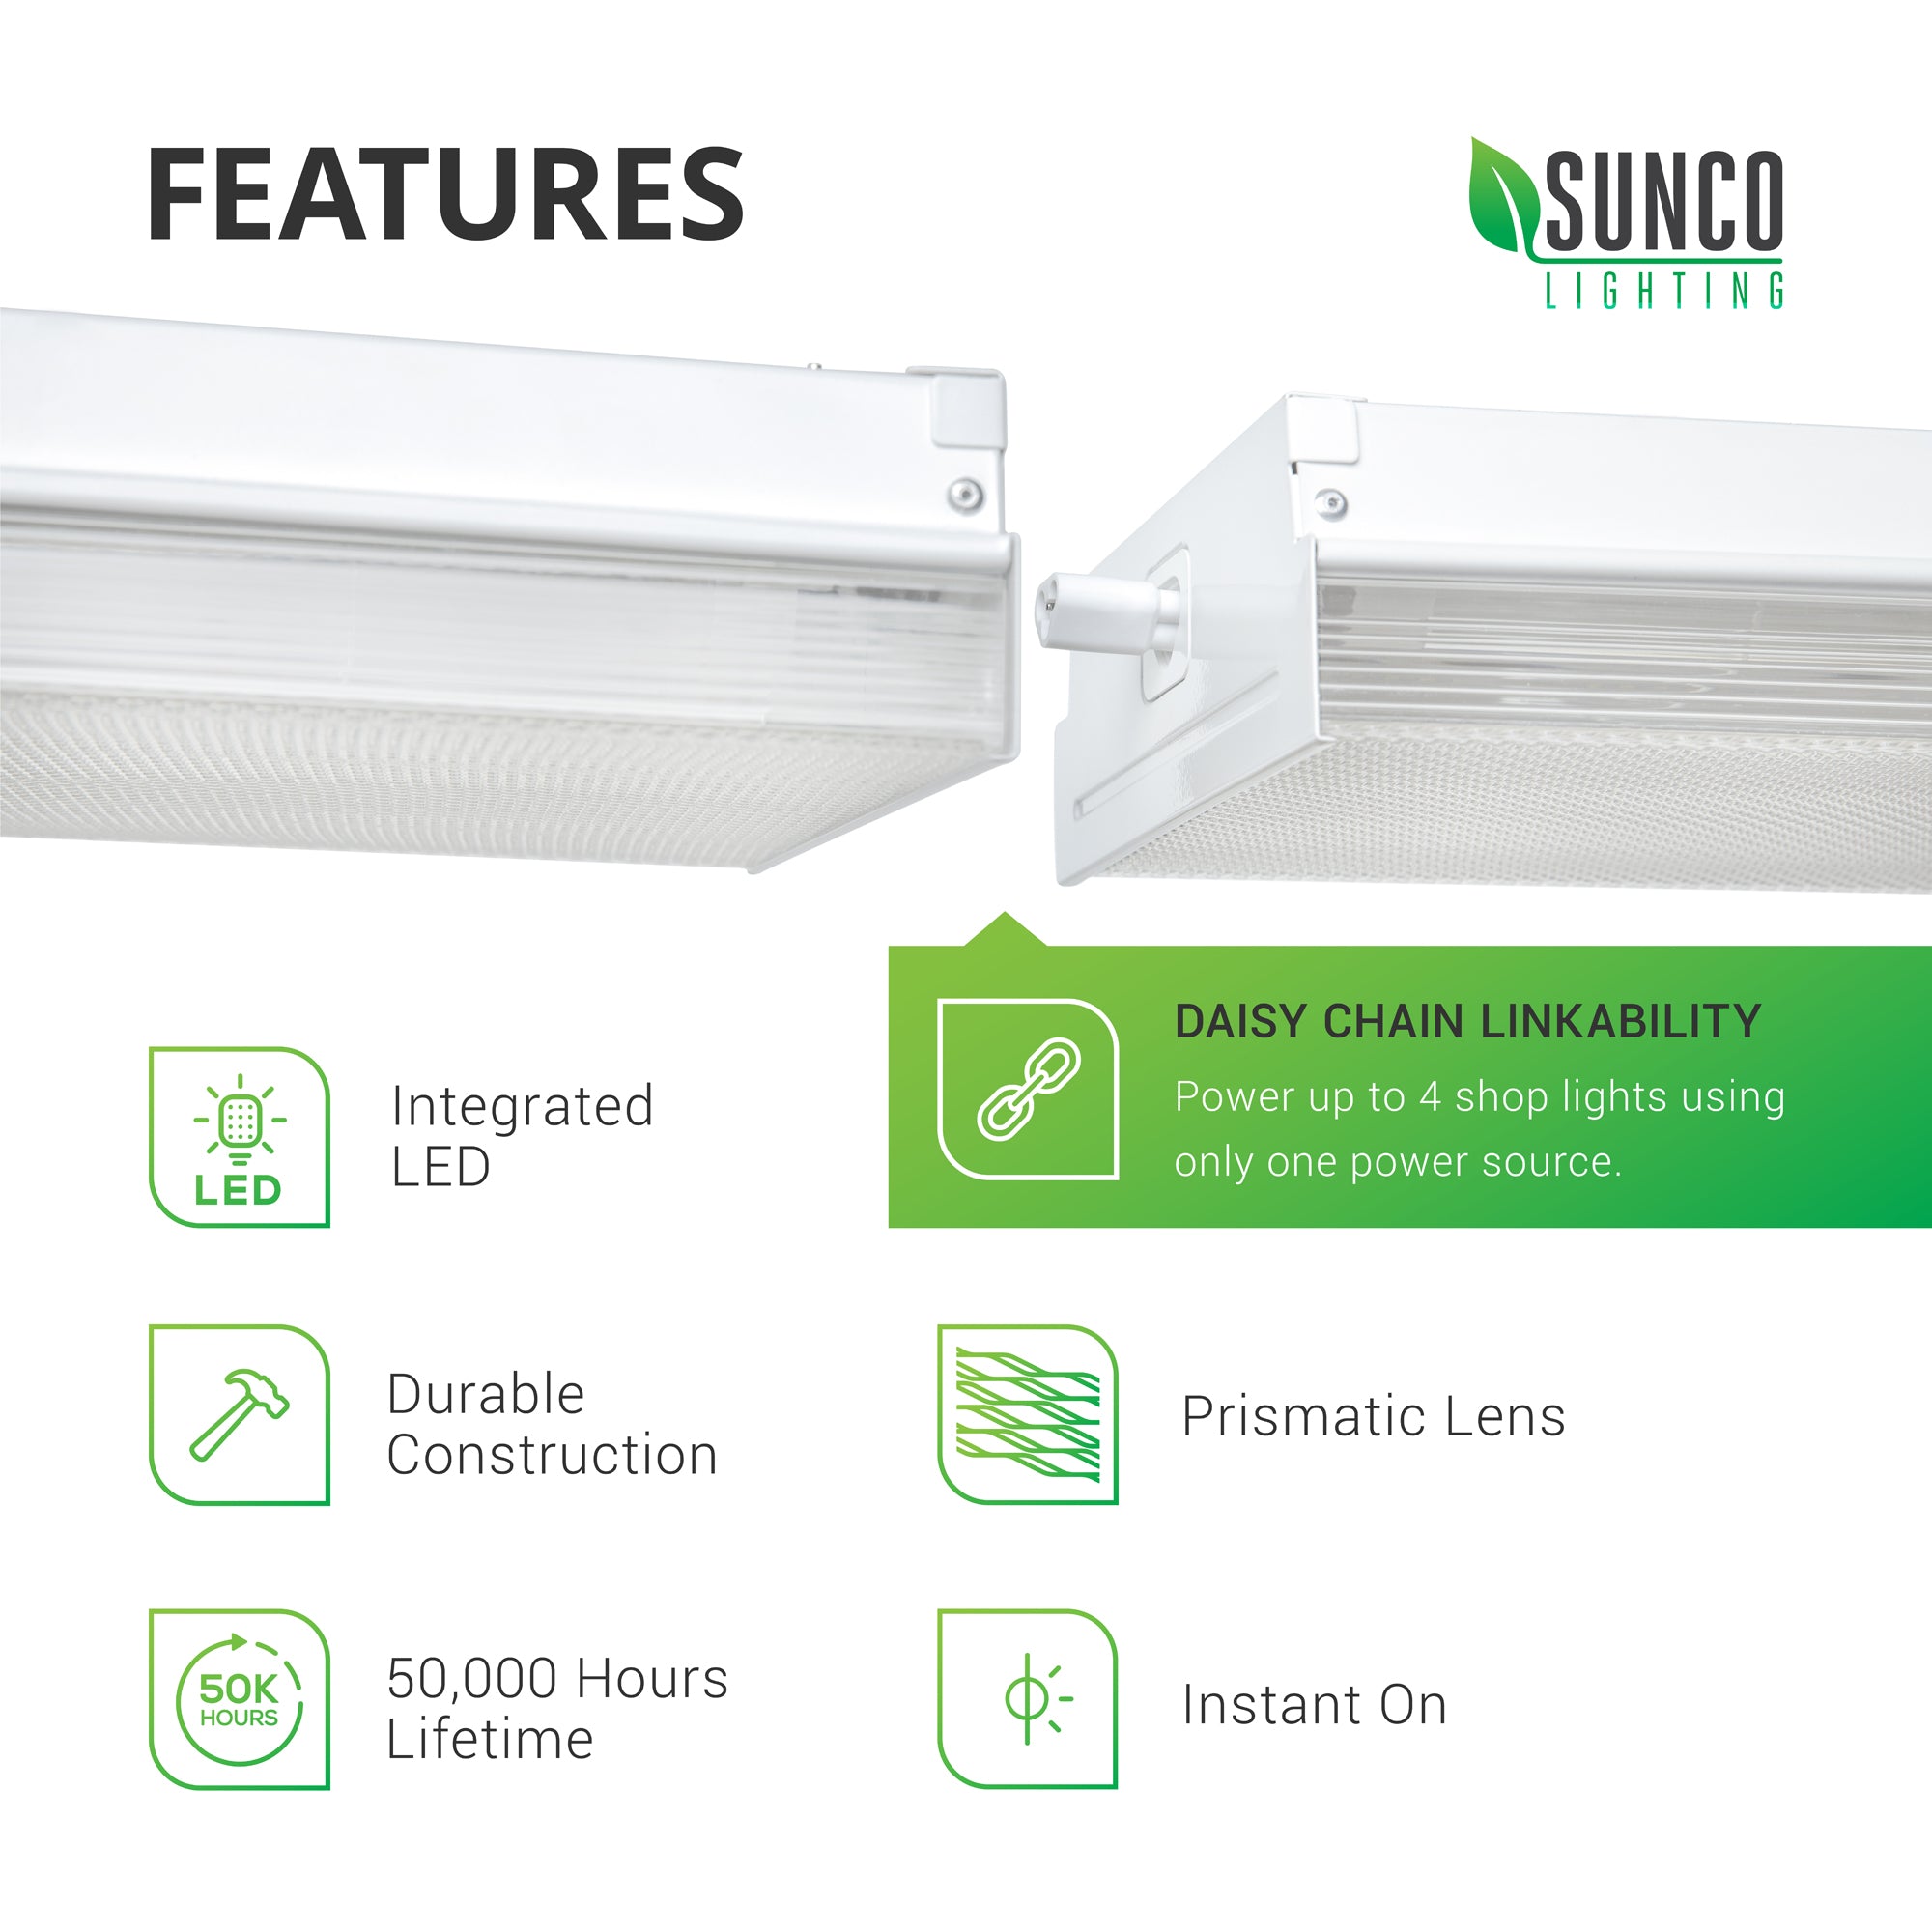 Features of the 11-inch Prisma Wraparound LED Shop Light include Daisy Chain Linkability. This flush mounted fixture features integrated LEDs for no relamping during its 50,000 hour lifetime. It includes a prismatic lens cover and features durable construction for instant on, bright light that lasts a long time. You can power up to 4 11-inch wide LED shop lights using only one power source. 